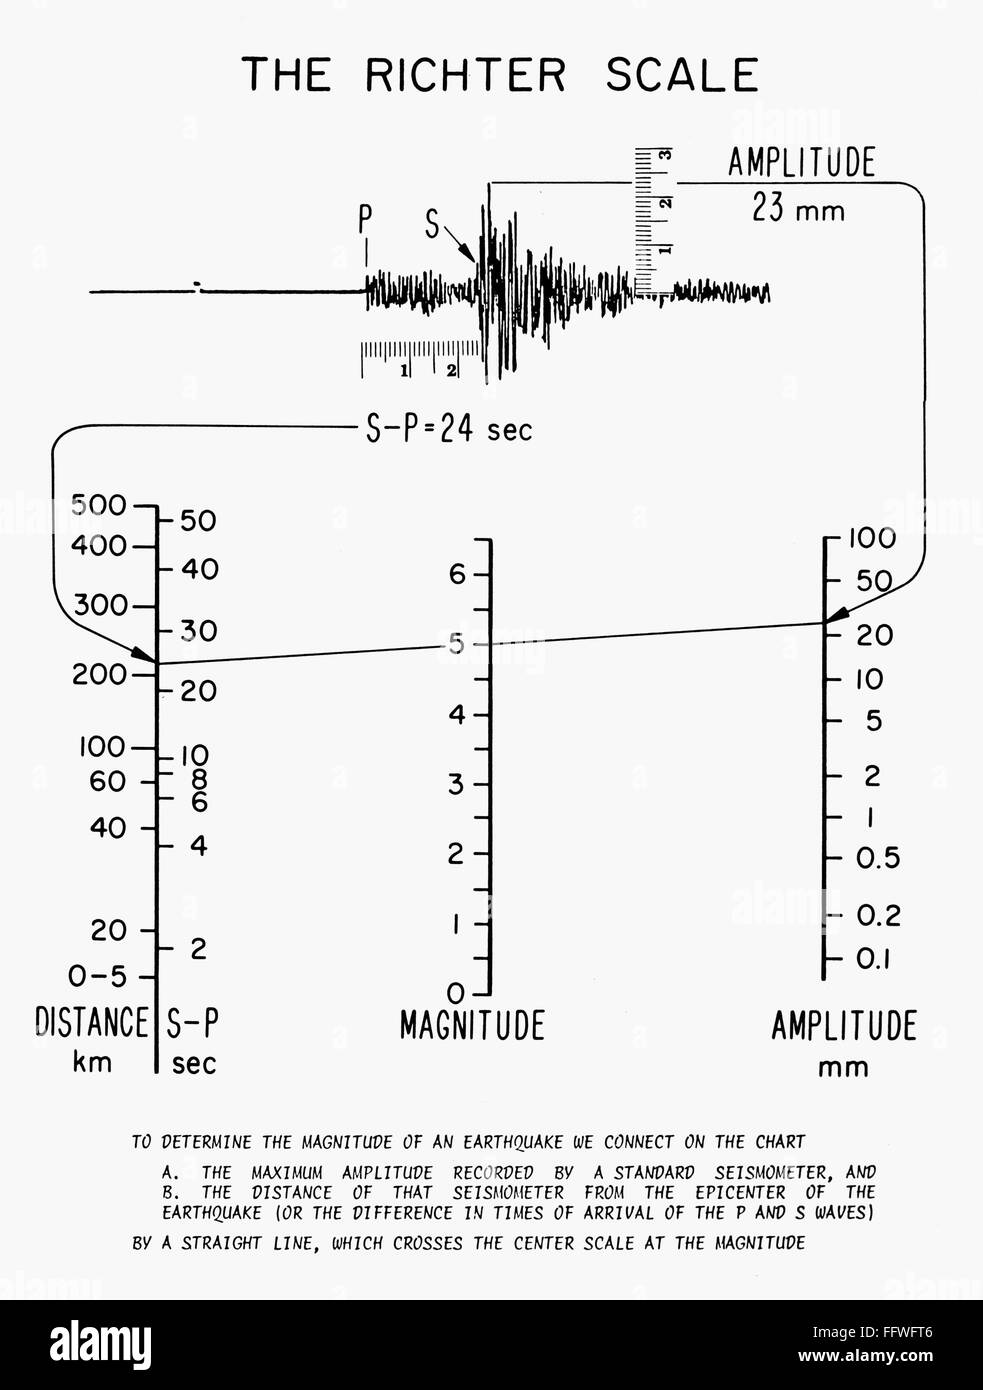 File:How-the-Richter-Magnitude-Scale-is-determined.jpg - Wikipedia